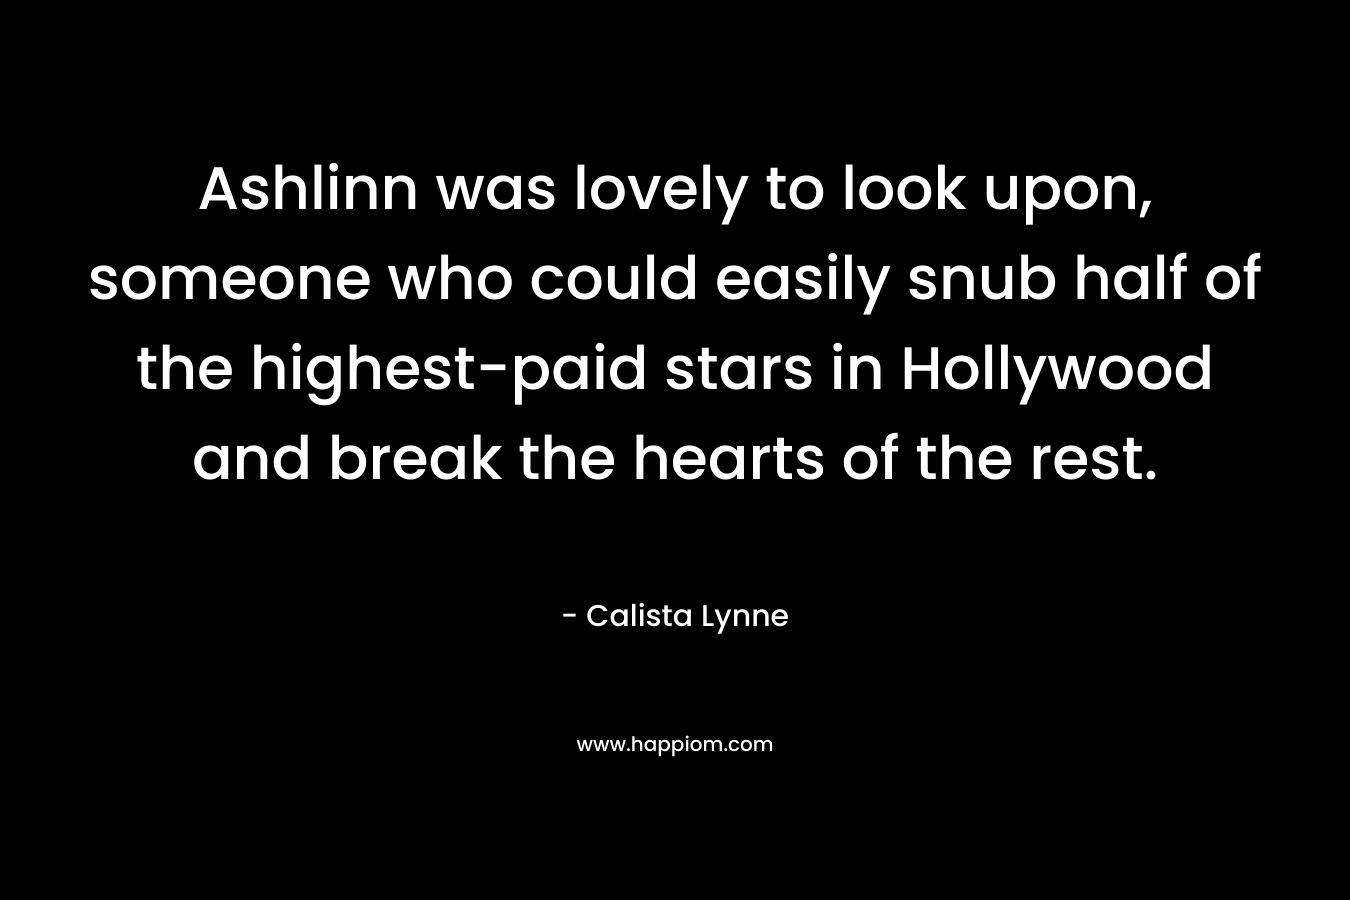 Ashlinn was lovely to look upon, someone who could easily snub half of the highest-paid stars in Hollywood and break the hearts of the rest.